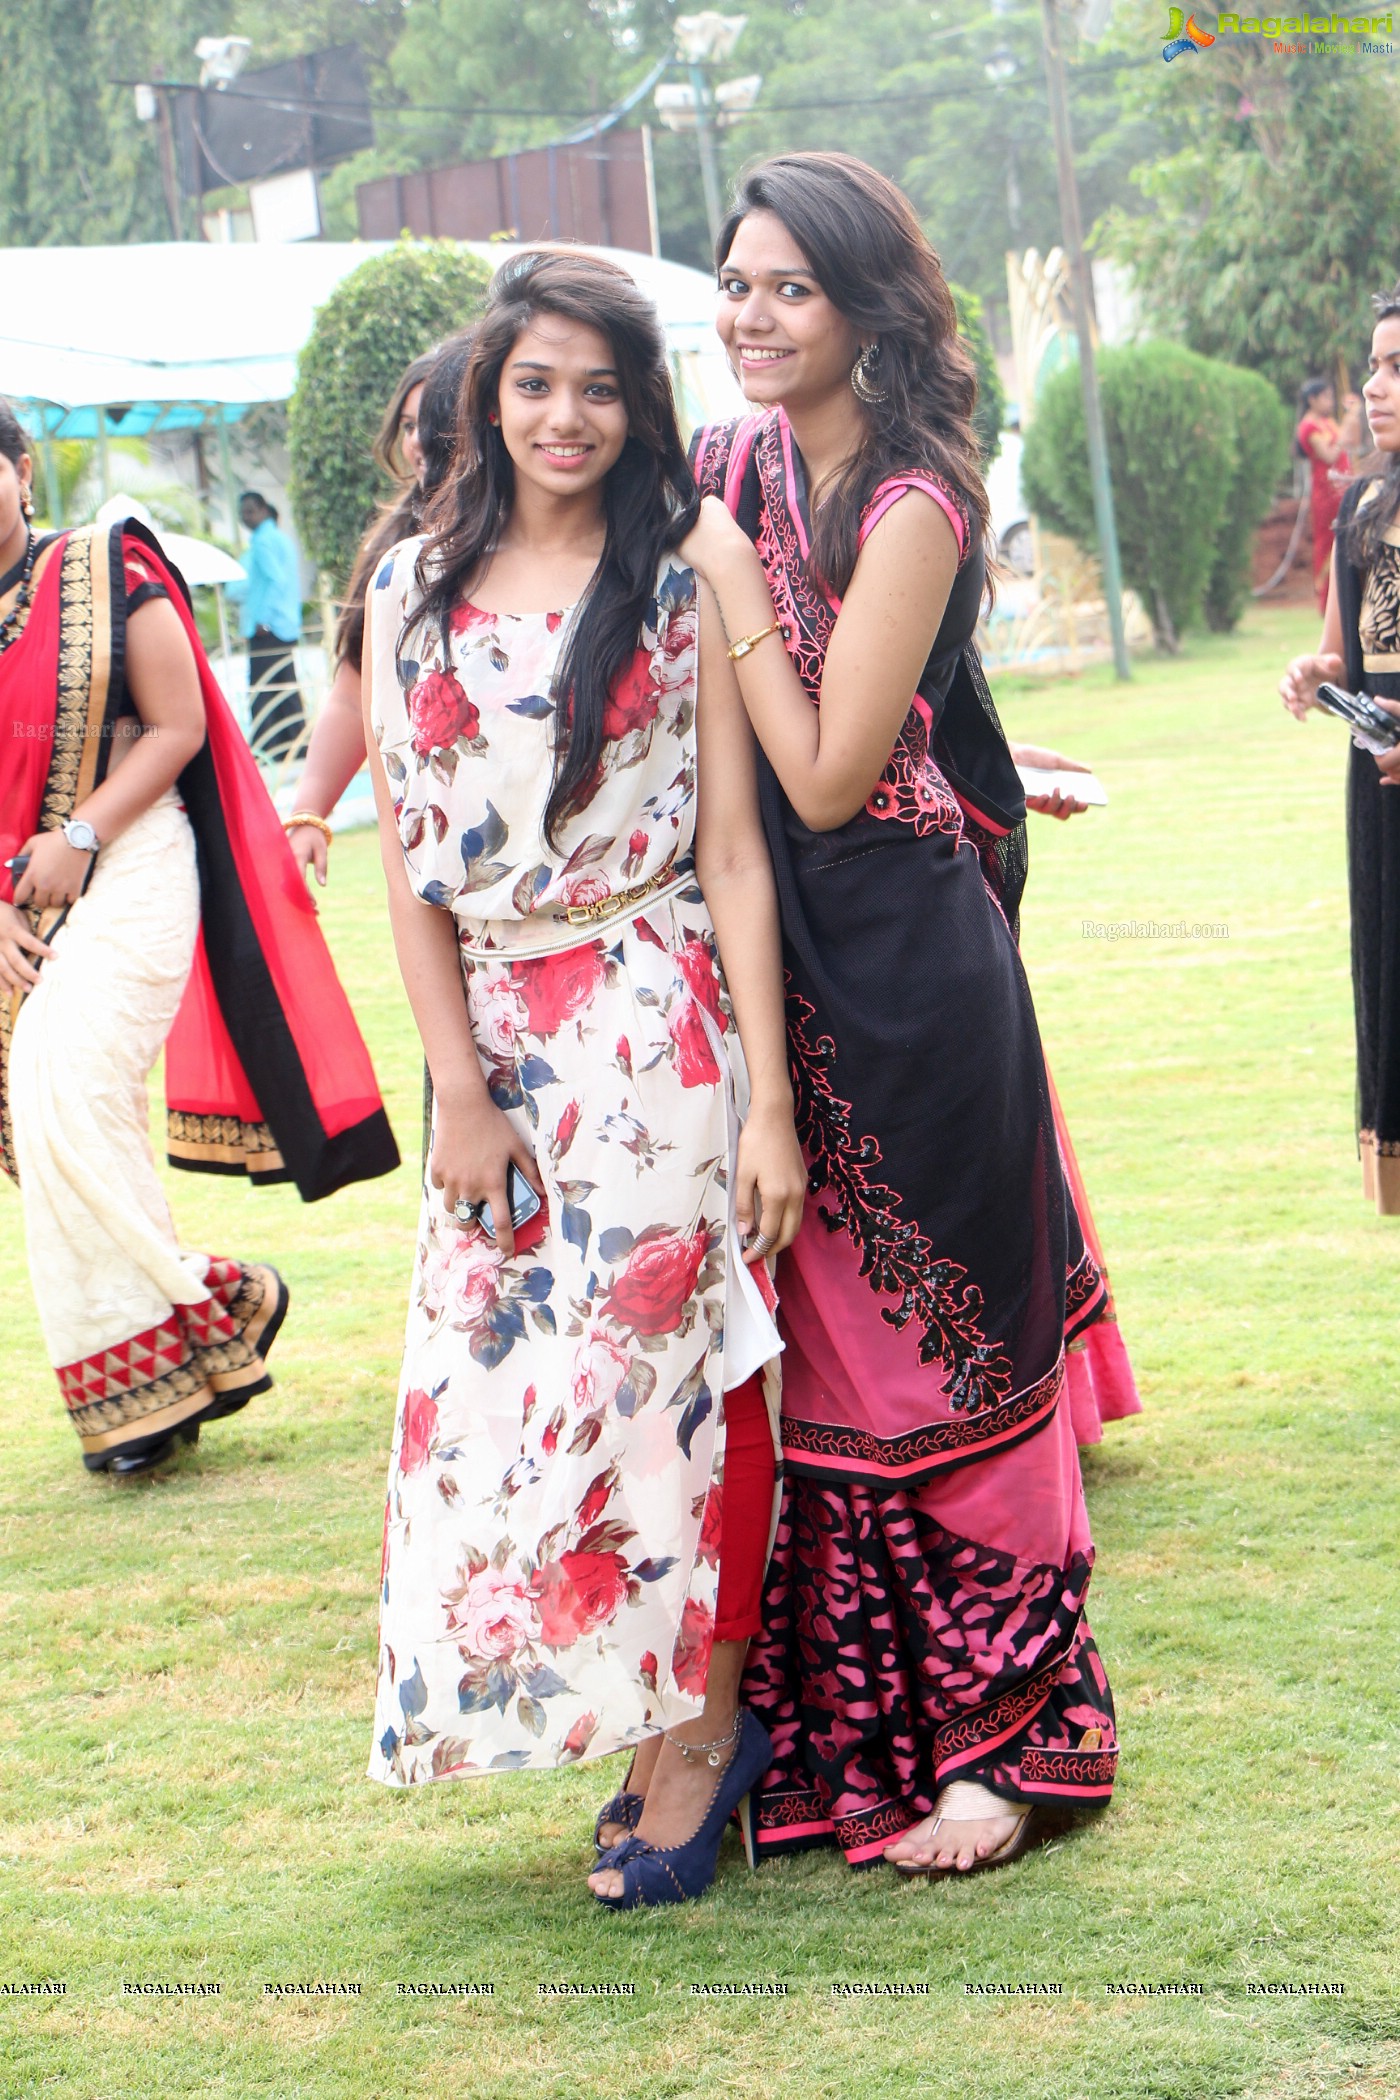 Villa Marie Degree College for Women Freshers Party 2015 at Bantia Garden, Hyderabad